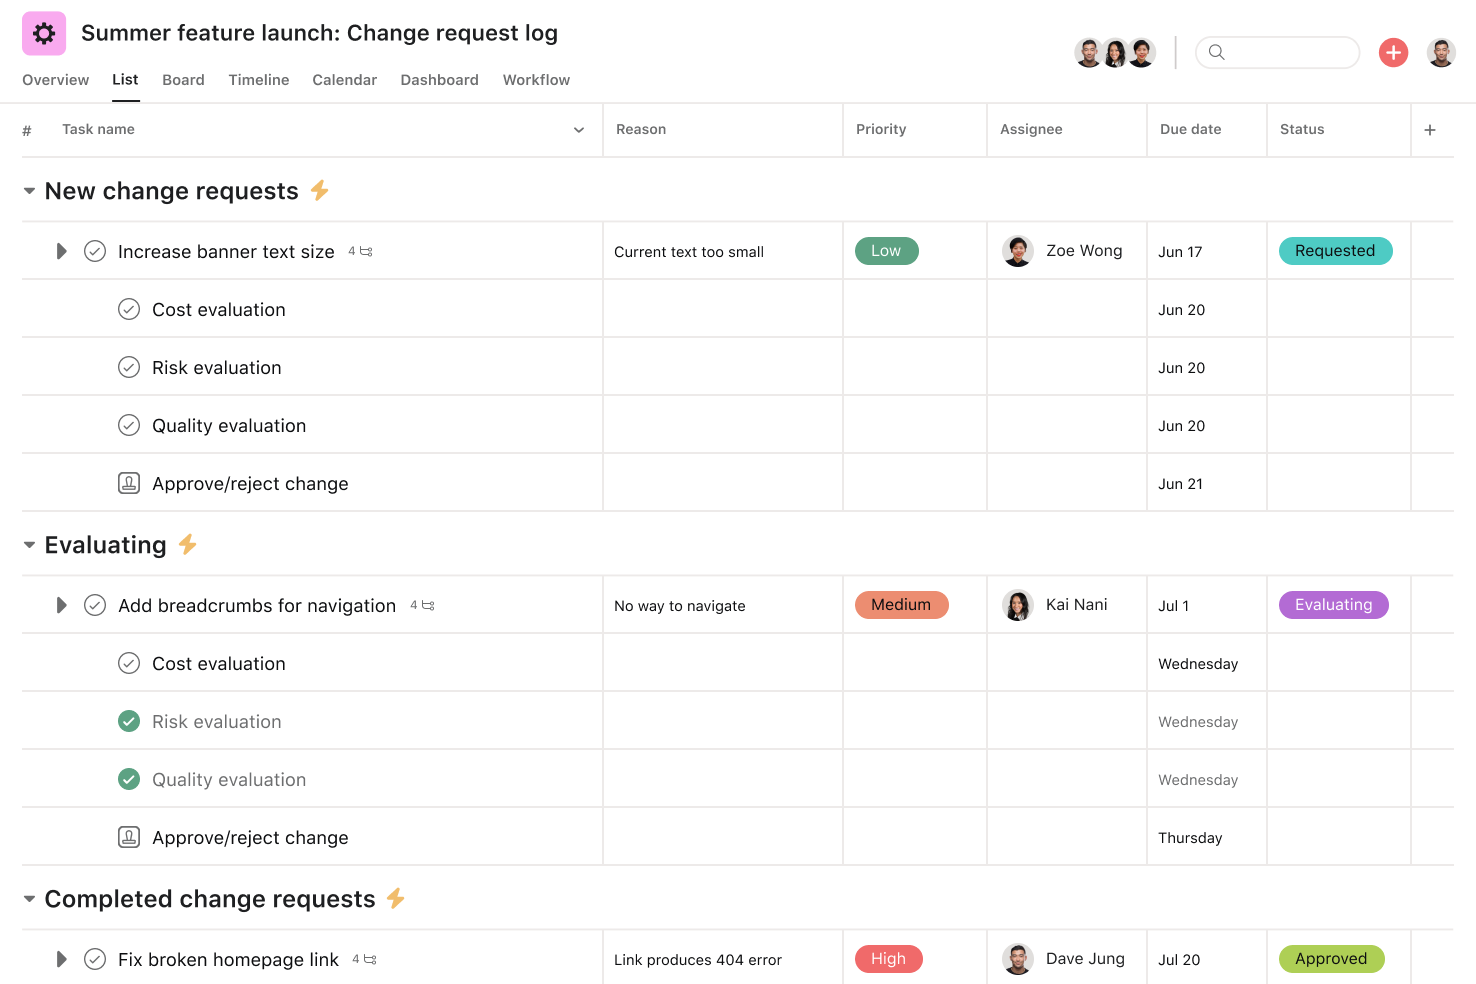 [product ui] Change request log template in Asana, spreadsheet-style project view (List)